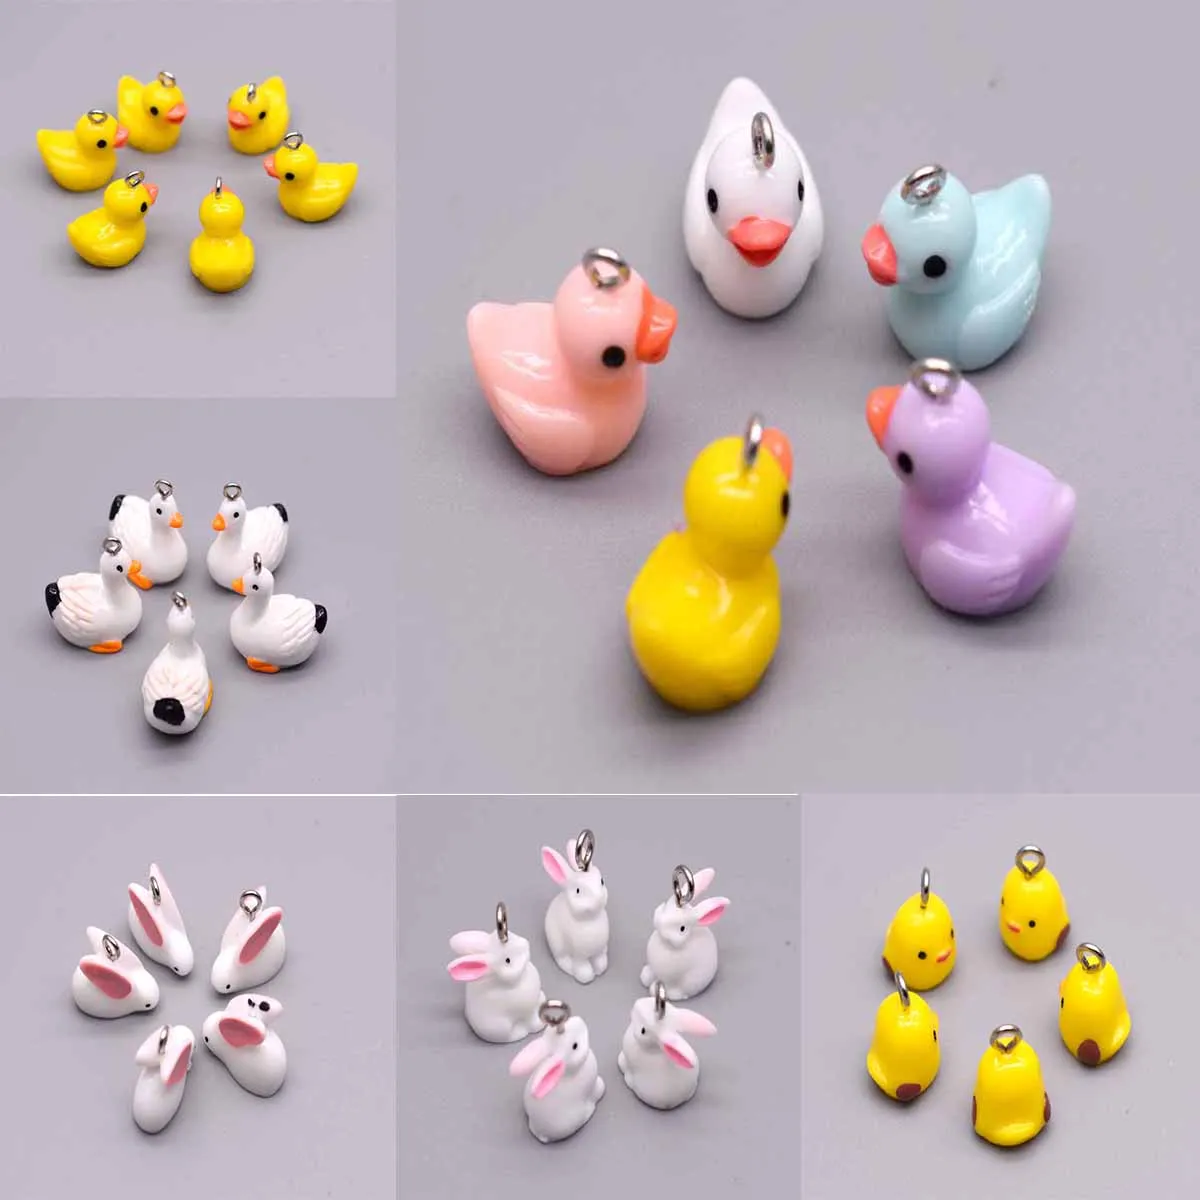 

10pcs/lot Cute Animal Charms Resin Pendants For Handmade Decoration Bracelets Necklace Earring Key chain Jewelry Making